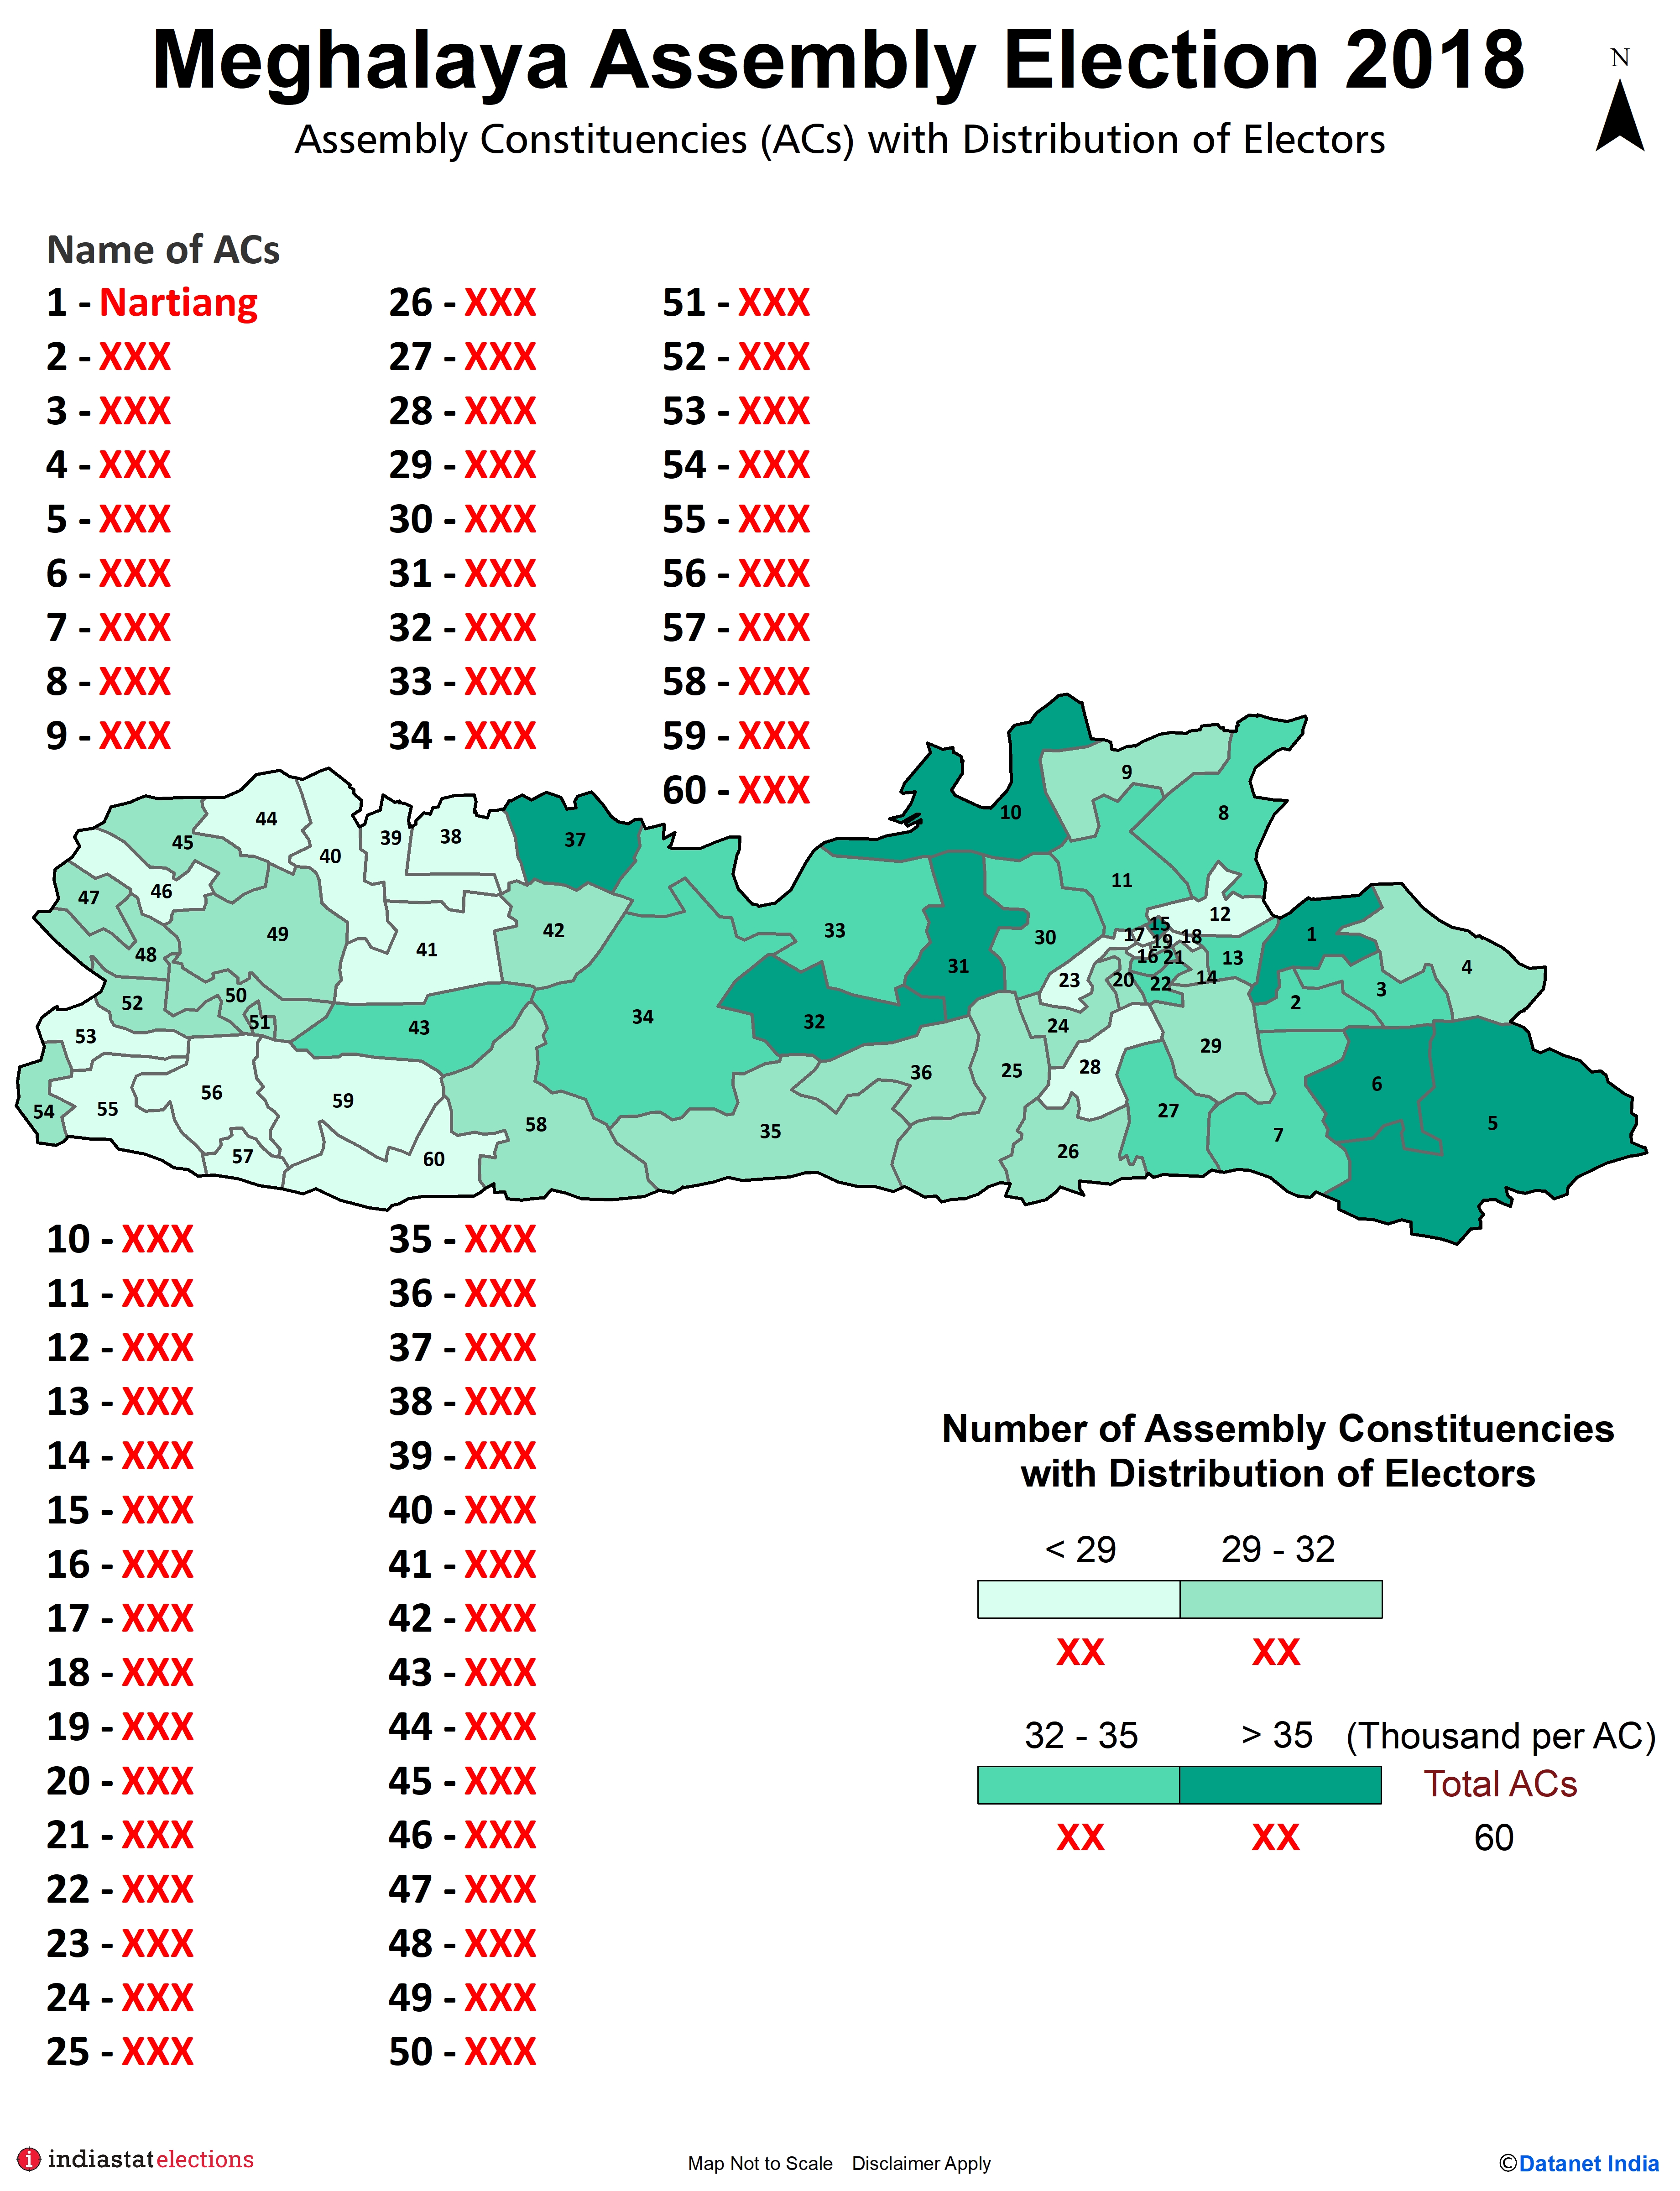 Assembly Constituencies (ACs) with Distribution of Electors in Meghalaya (Assembly Election - 2018)